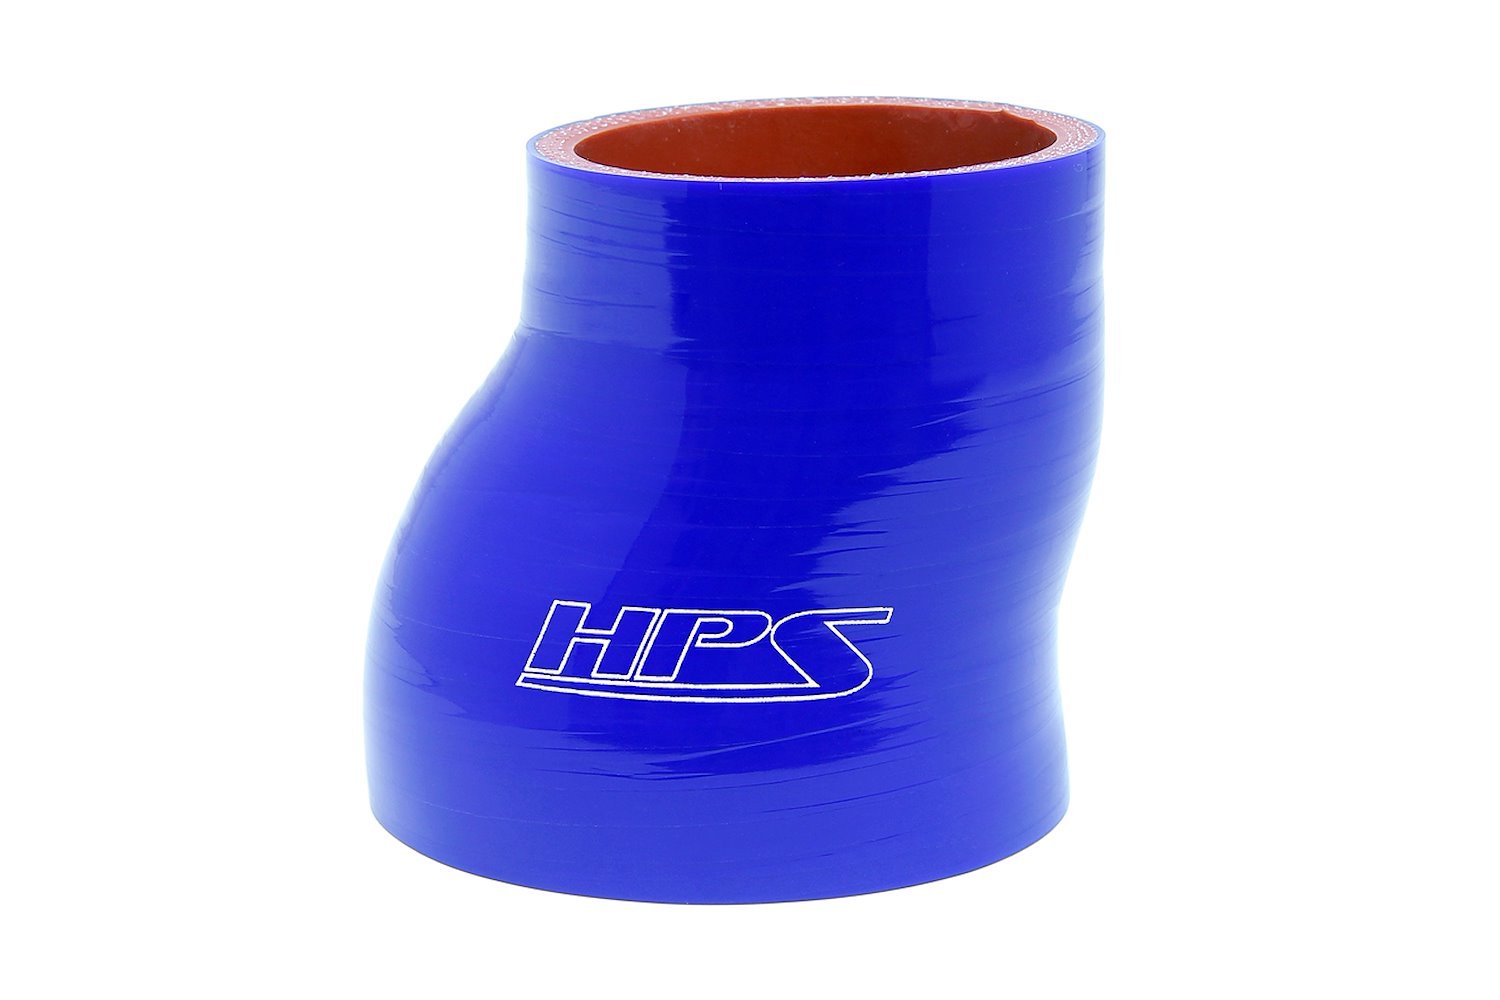 HTSOR-350-400-L4-BLUE Silicone Offset Reducer Hose, High-Temp Reinforced, 3-1/2 in. - 4 in. ID, 4 in. Long, Blue